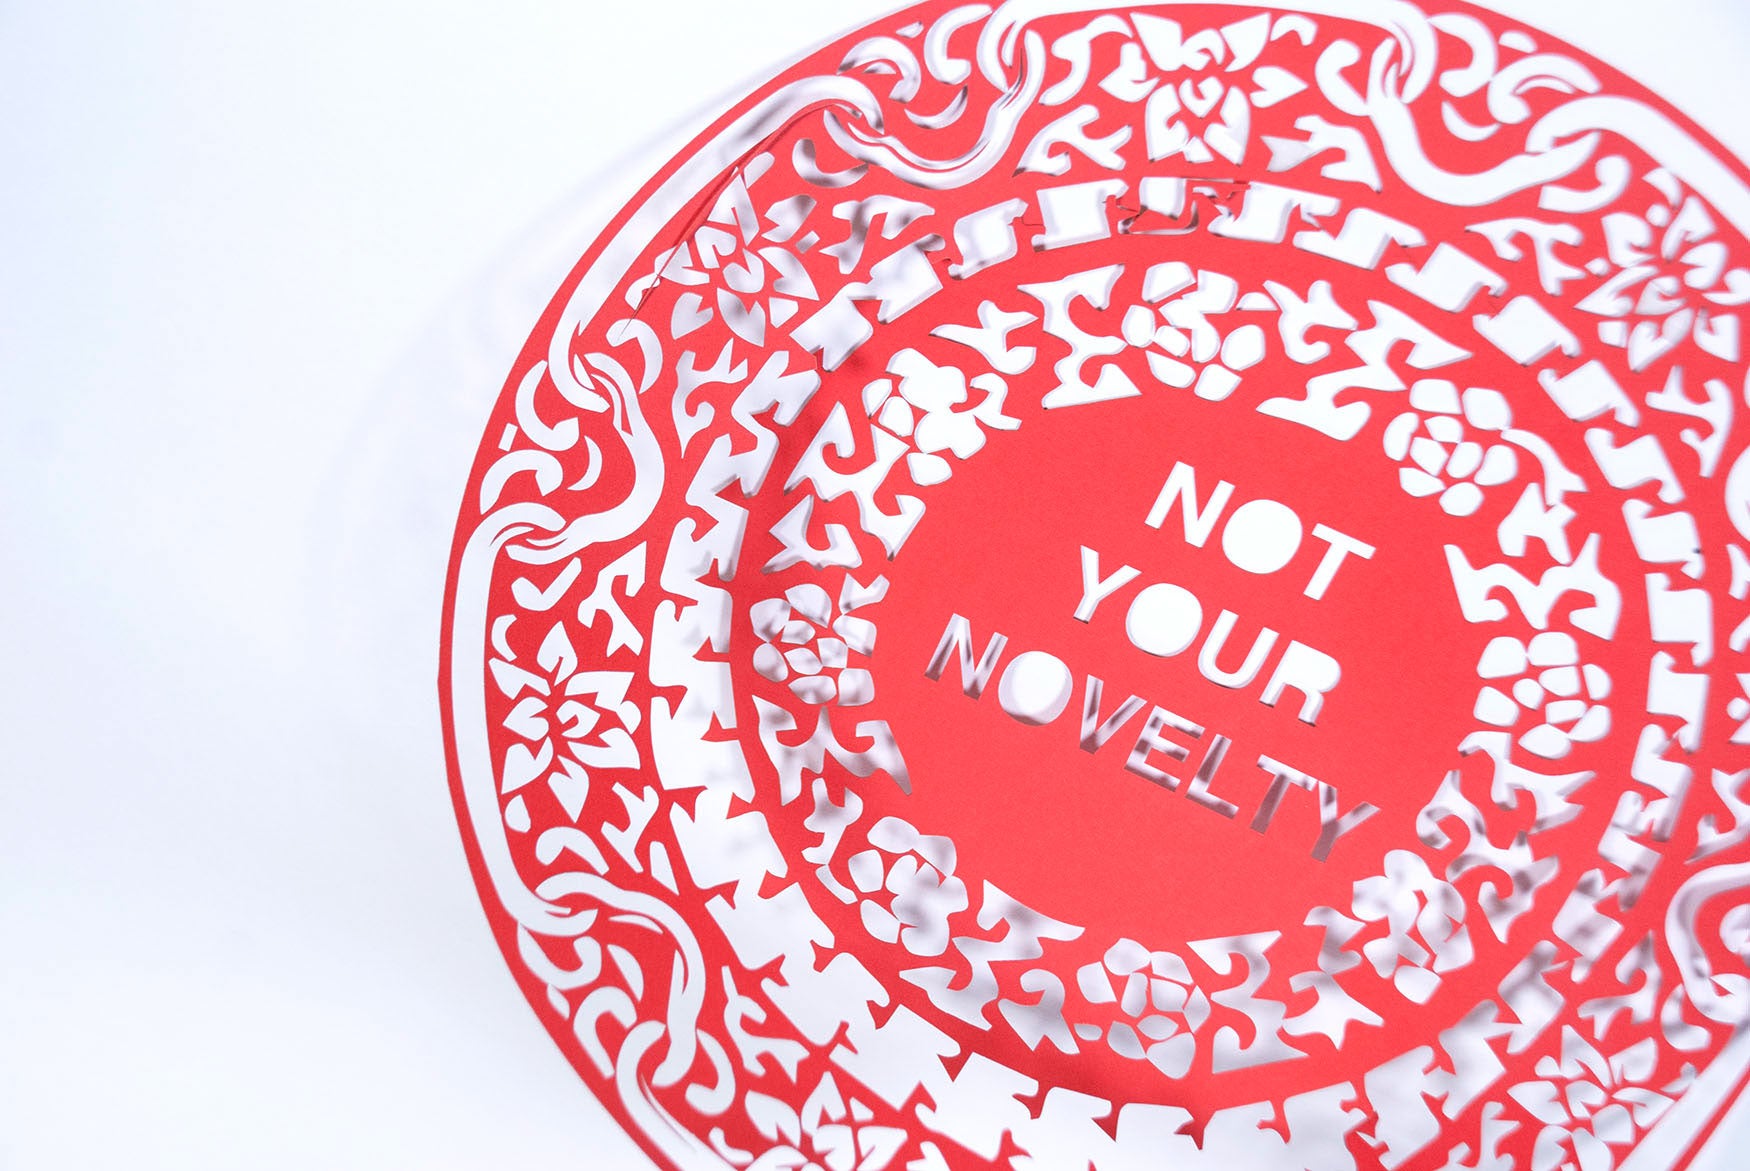 Red paper cutting that reads "NOT YOUR NOVELTY"